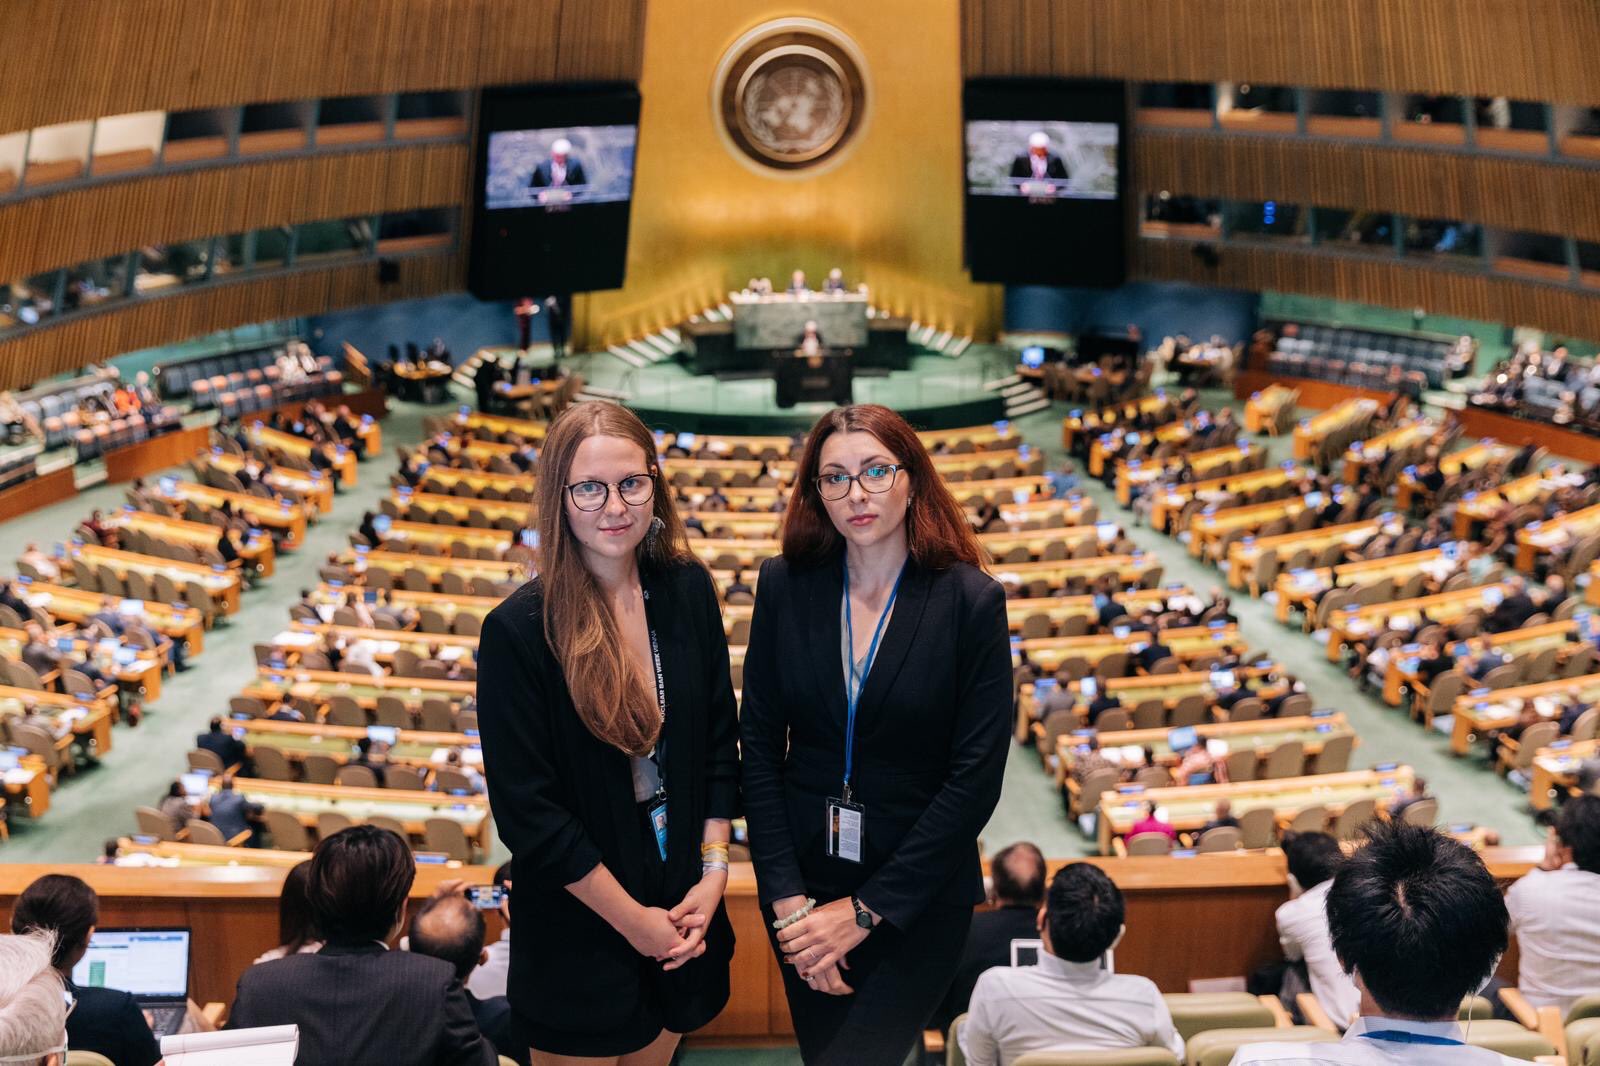 Two young Ukrainian voices, Yelyzaveta Khodorovska and Valeriia Hesse, who delivered a statement on behalf of ICAN calling for nuclear disarmament at the NPT Review Conference.